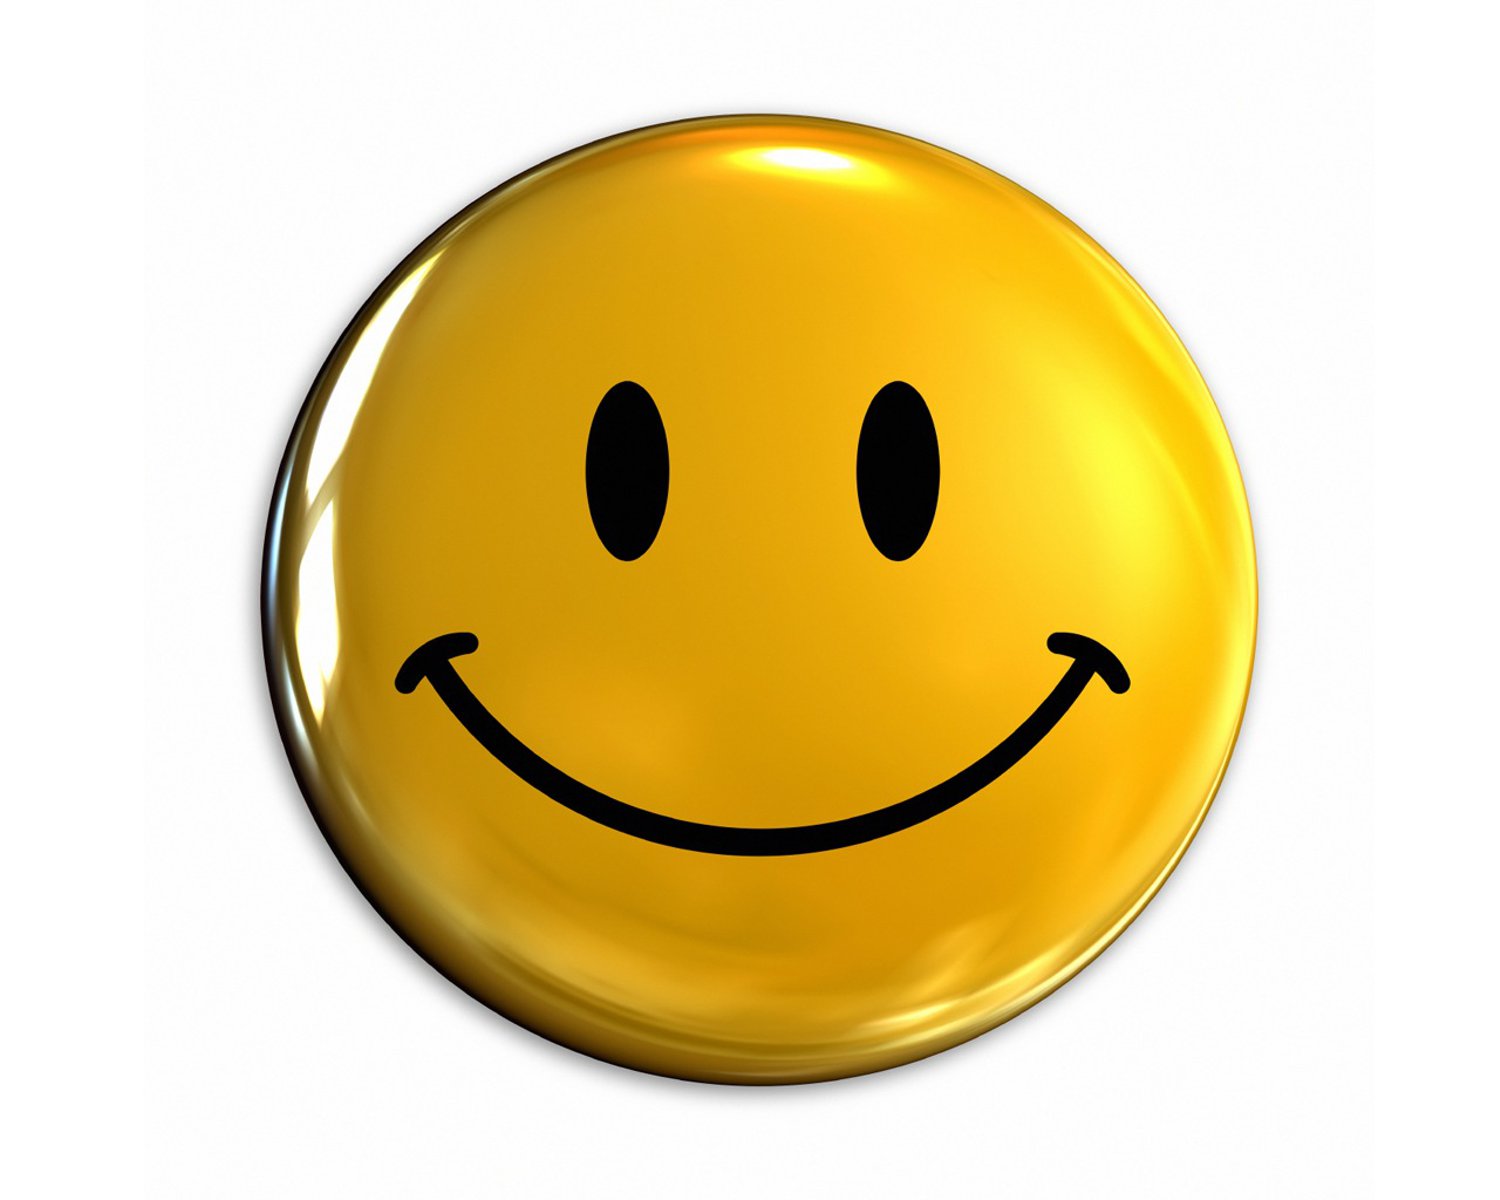 Wallpapers For > Smiley Face Wallpaper 3d